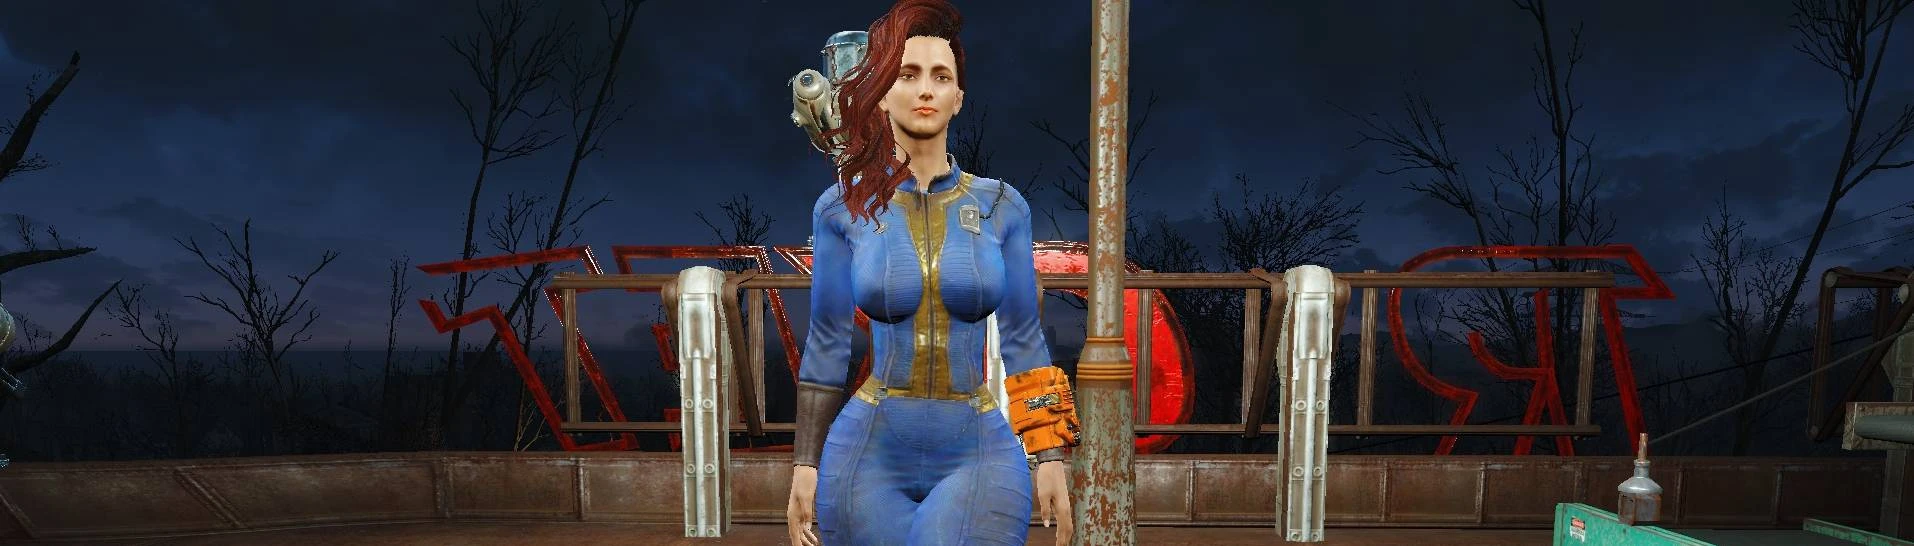 What Body Preset Mod is this? - Request & Find - Fallout 4 Non